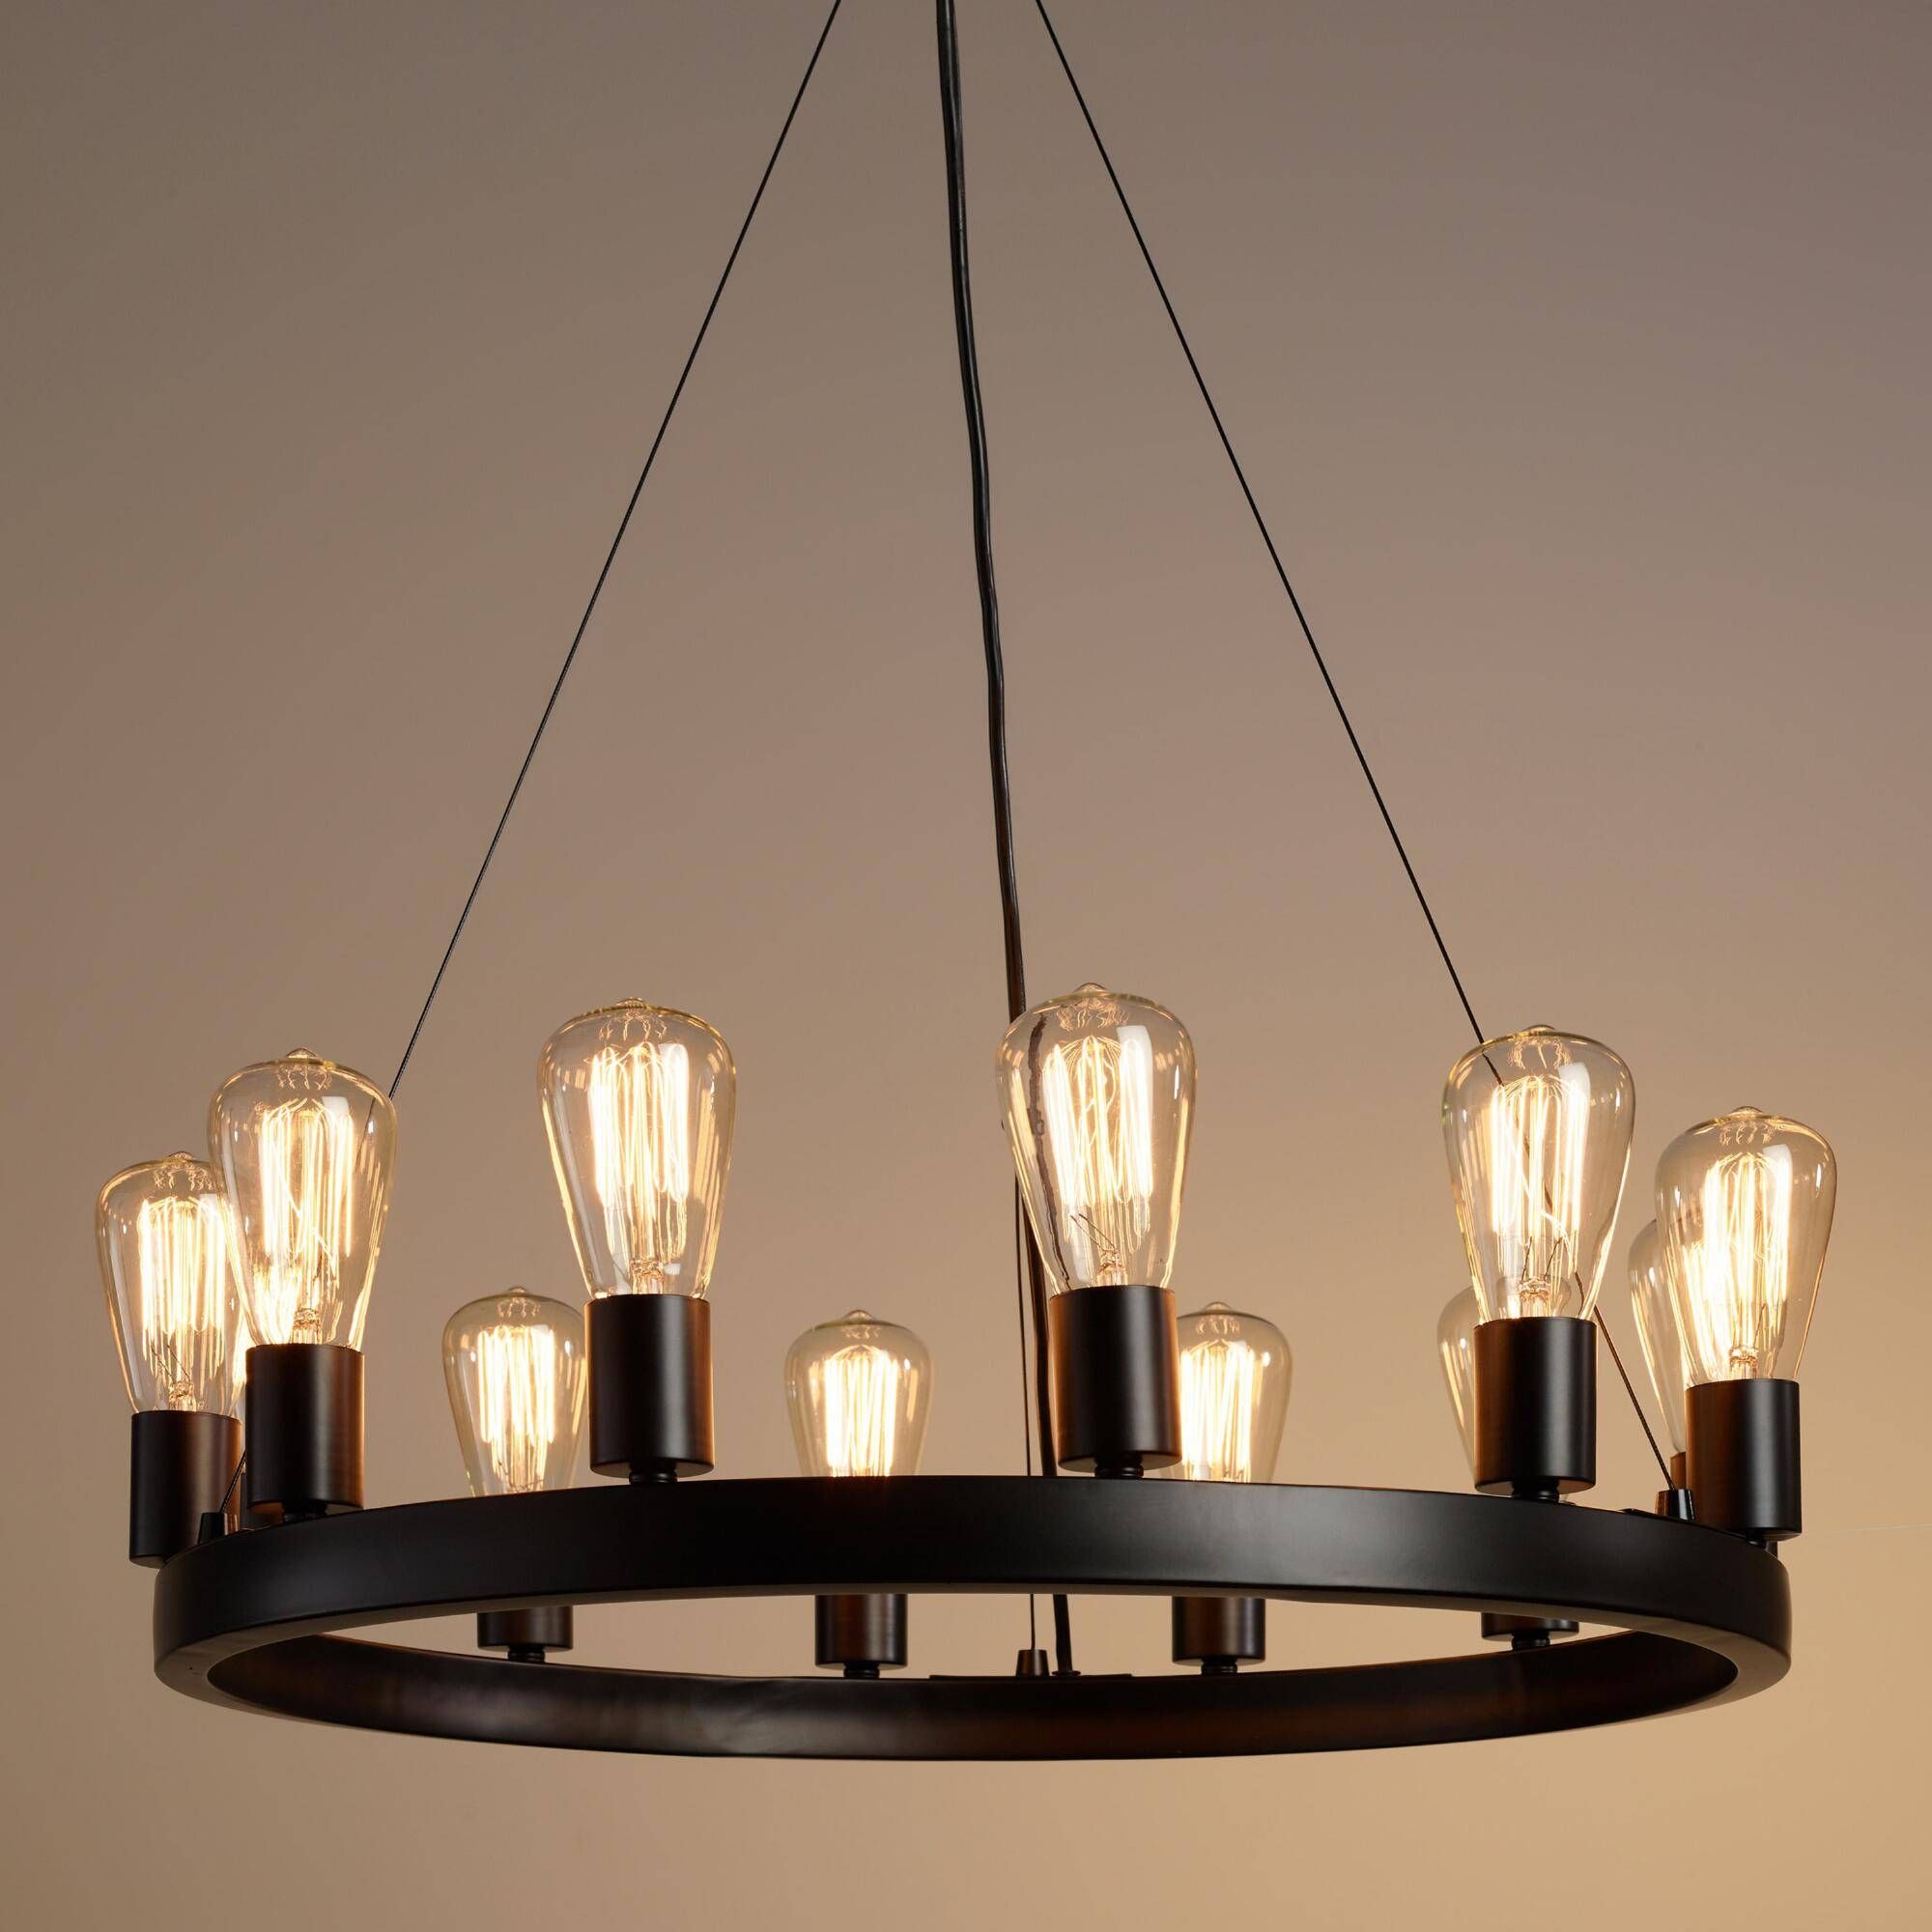 Chandeliers Design : Fabulous Amazing Round Light Edison Bulb Intended For Glass Pendant Lights With Edison Bulbs (View 12 of 15)